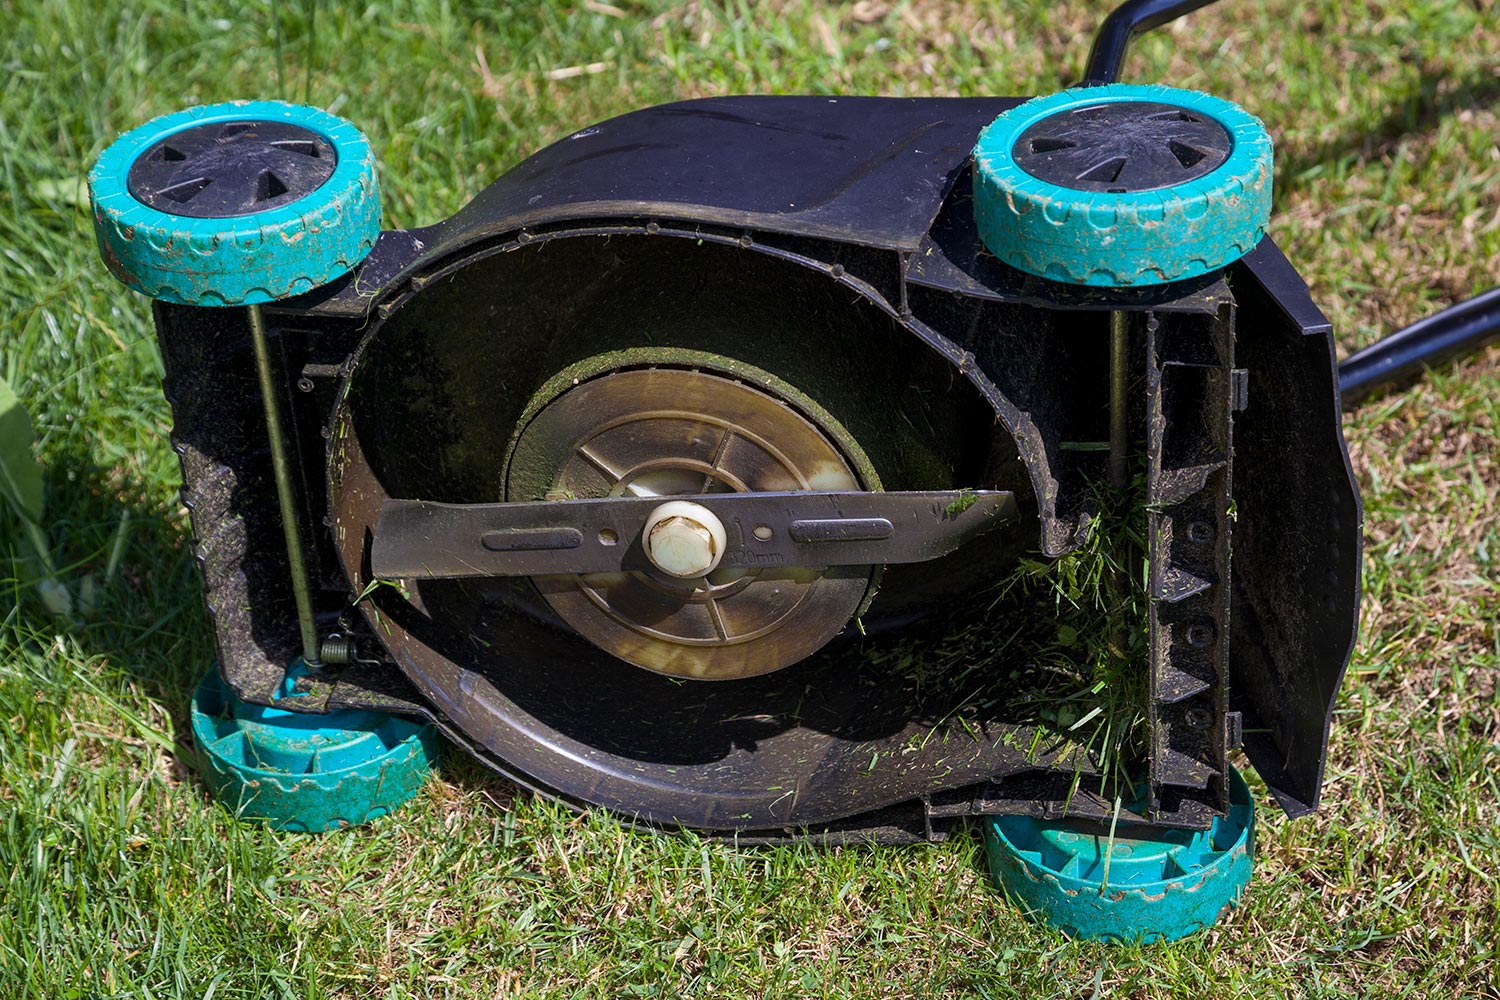 Lawn mower shortly after use from below